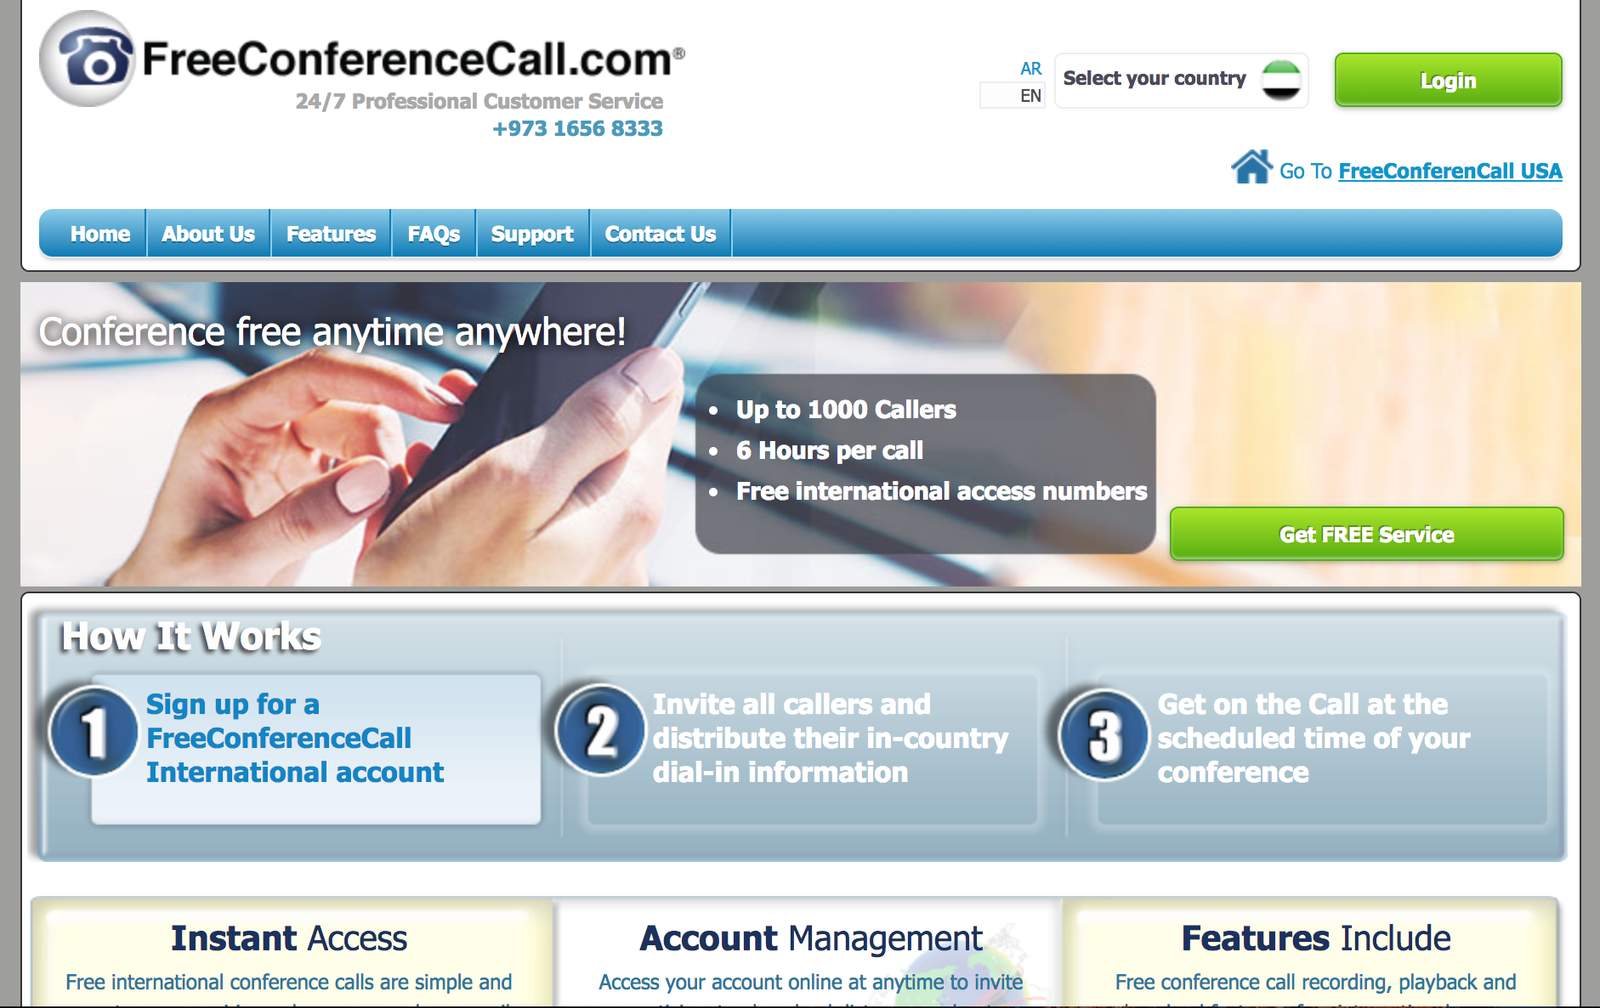 FreeConferenceCall.com Launches Free Conference Calling in Malawi